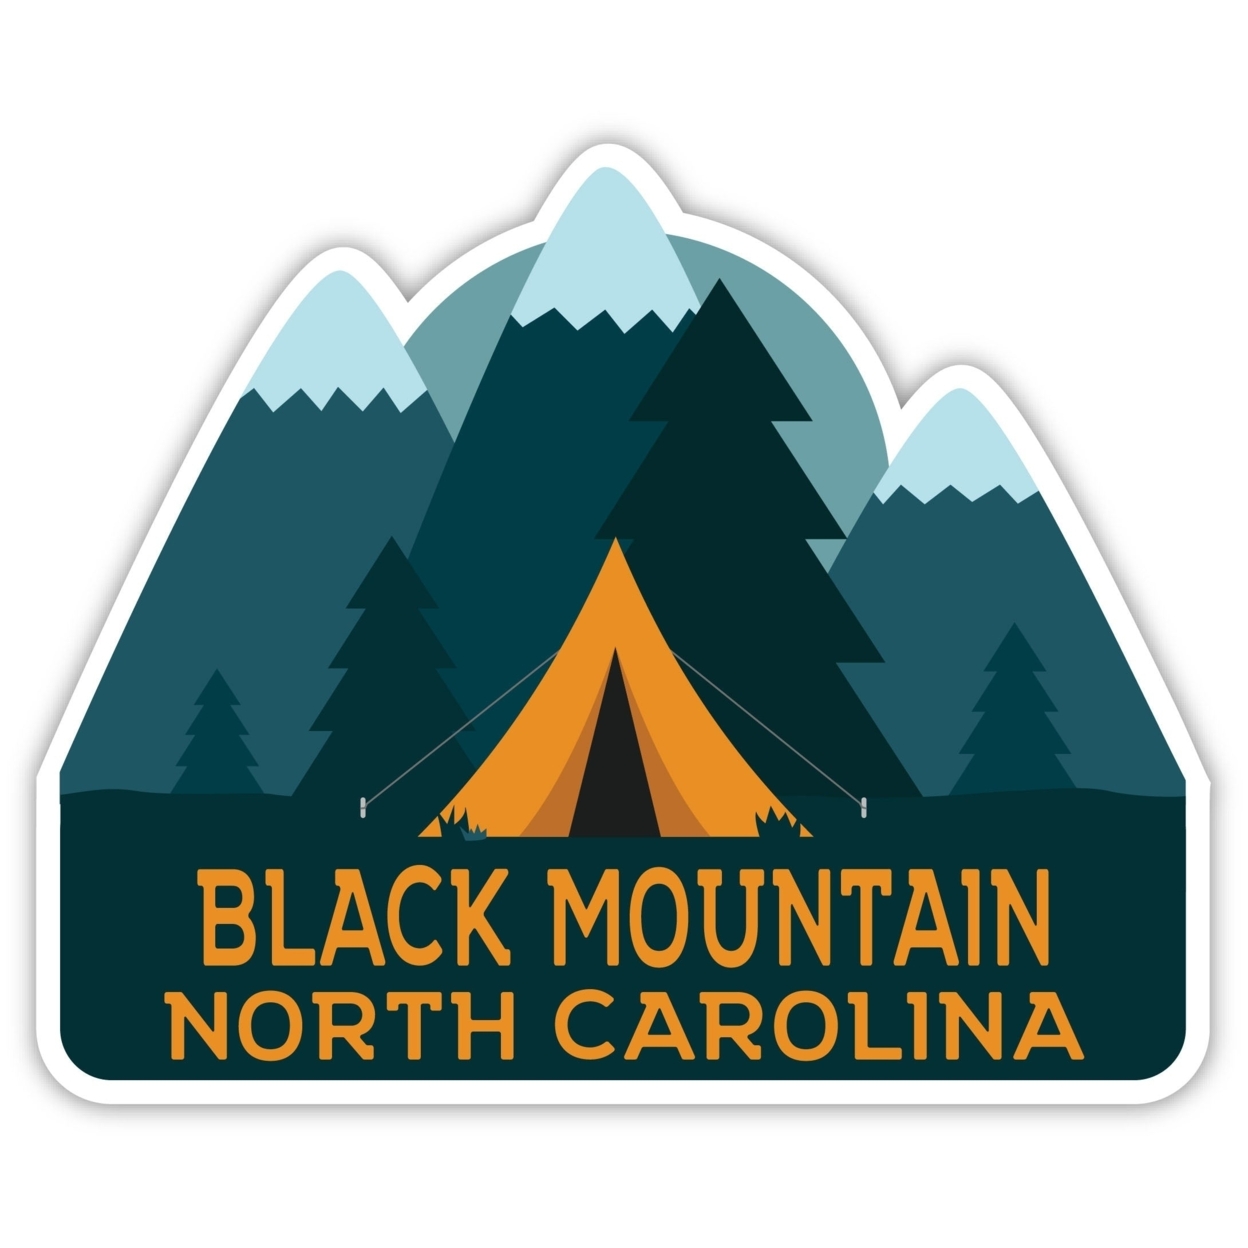 Black Mountain North Carolina Souvenir Decorative Stickers (Choose Theme And Size) - 4-Pack, 2-Inch, Tent